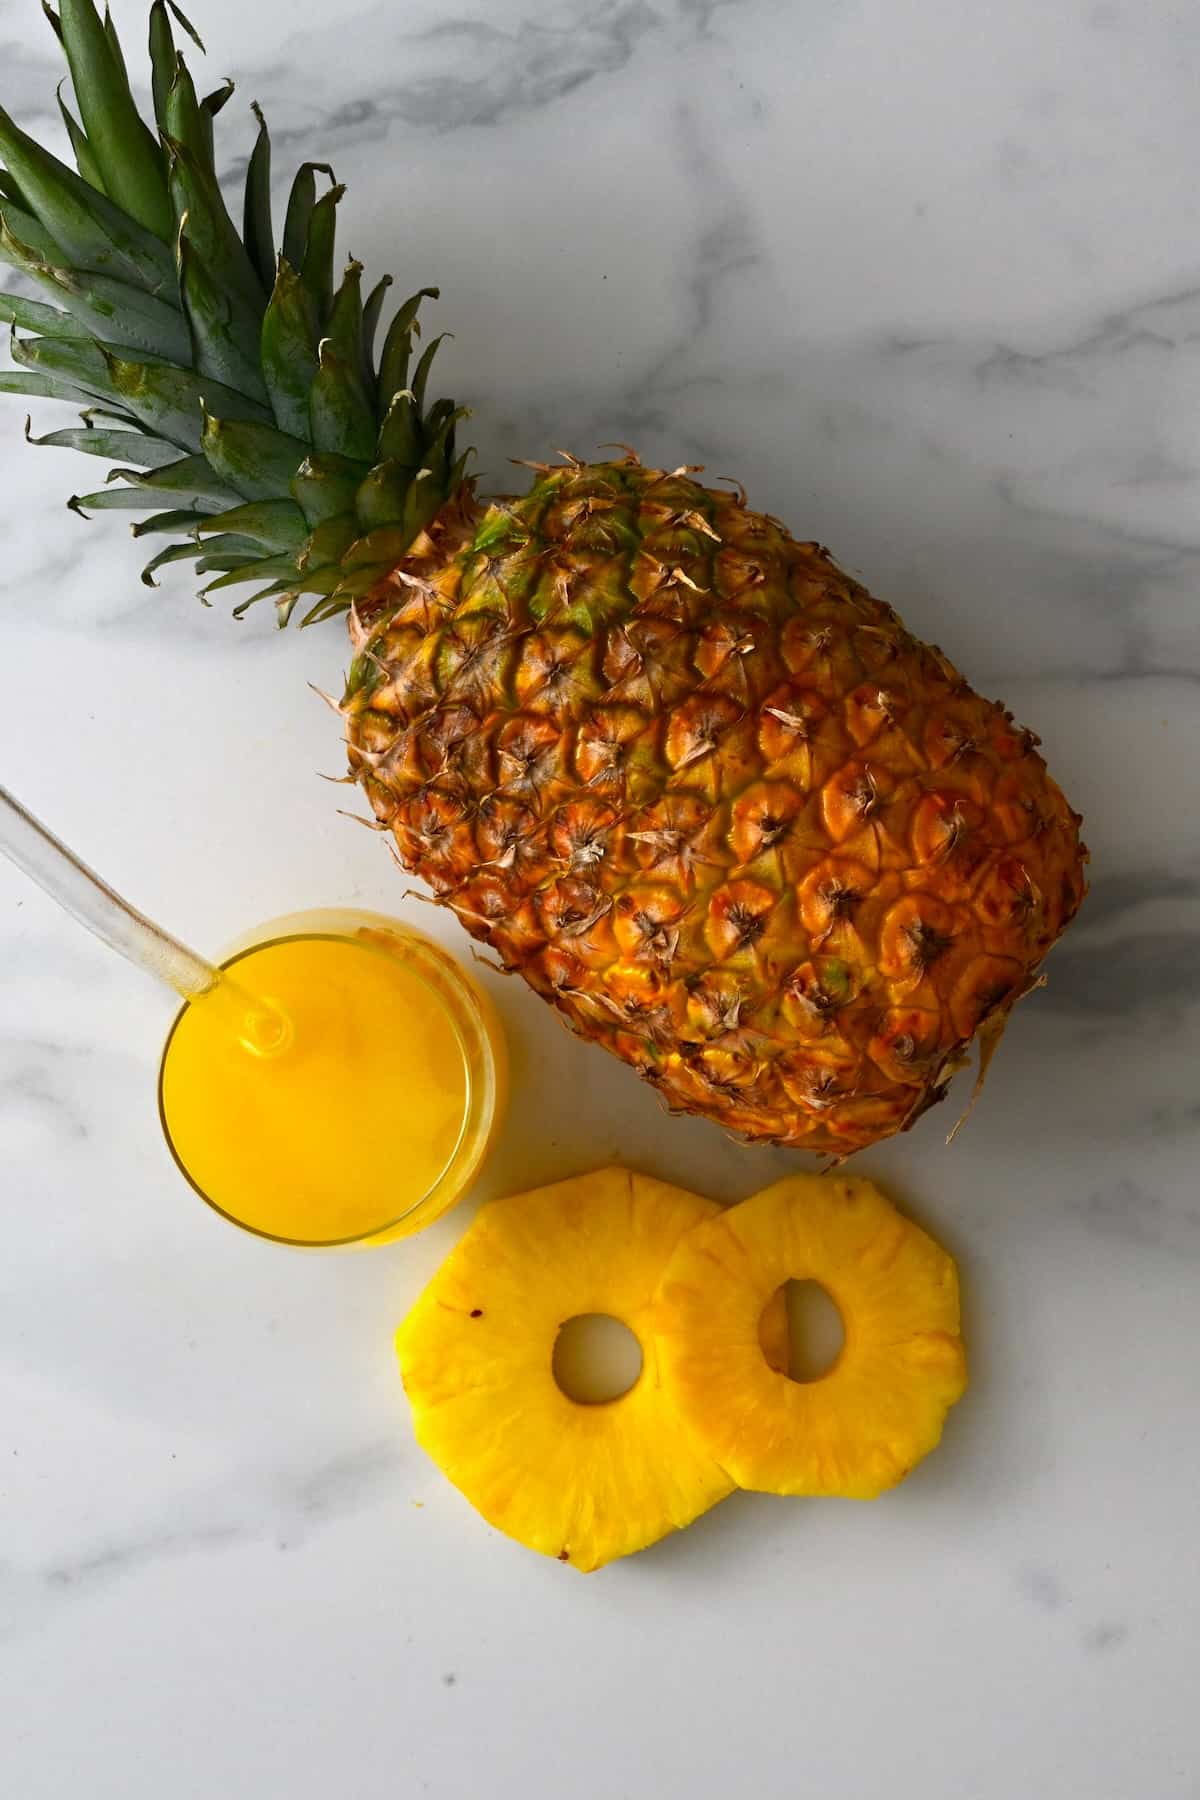 Pineapple and a glass with its juice next to it